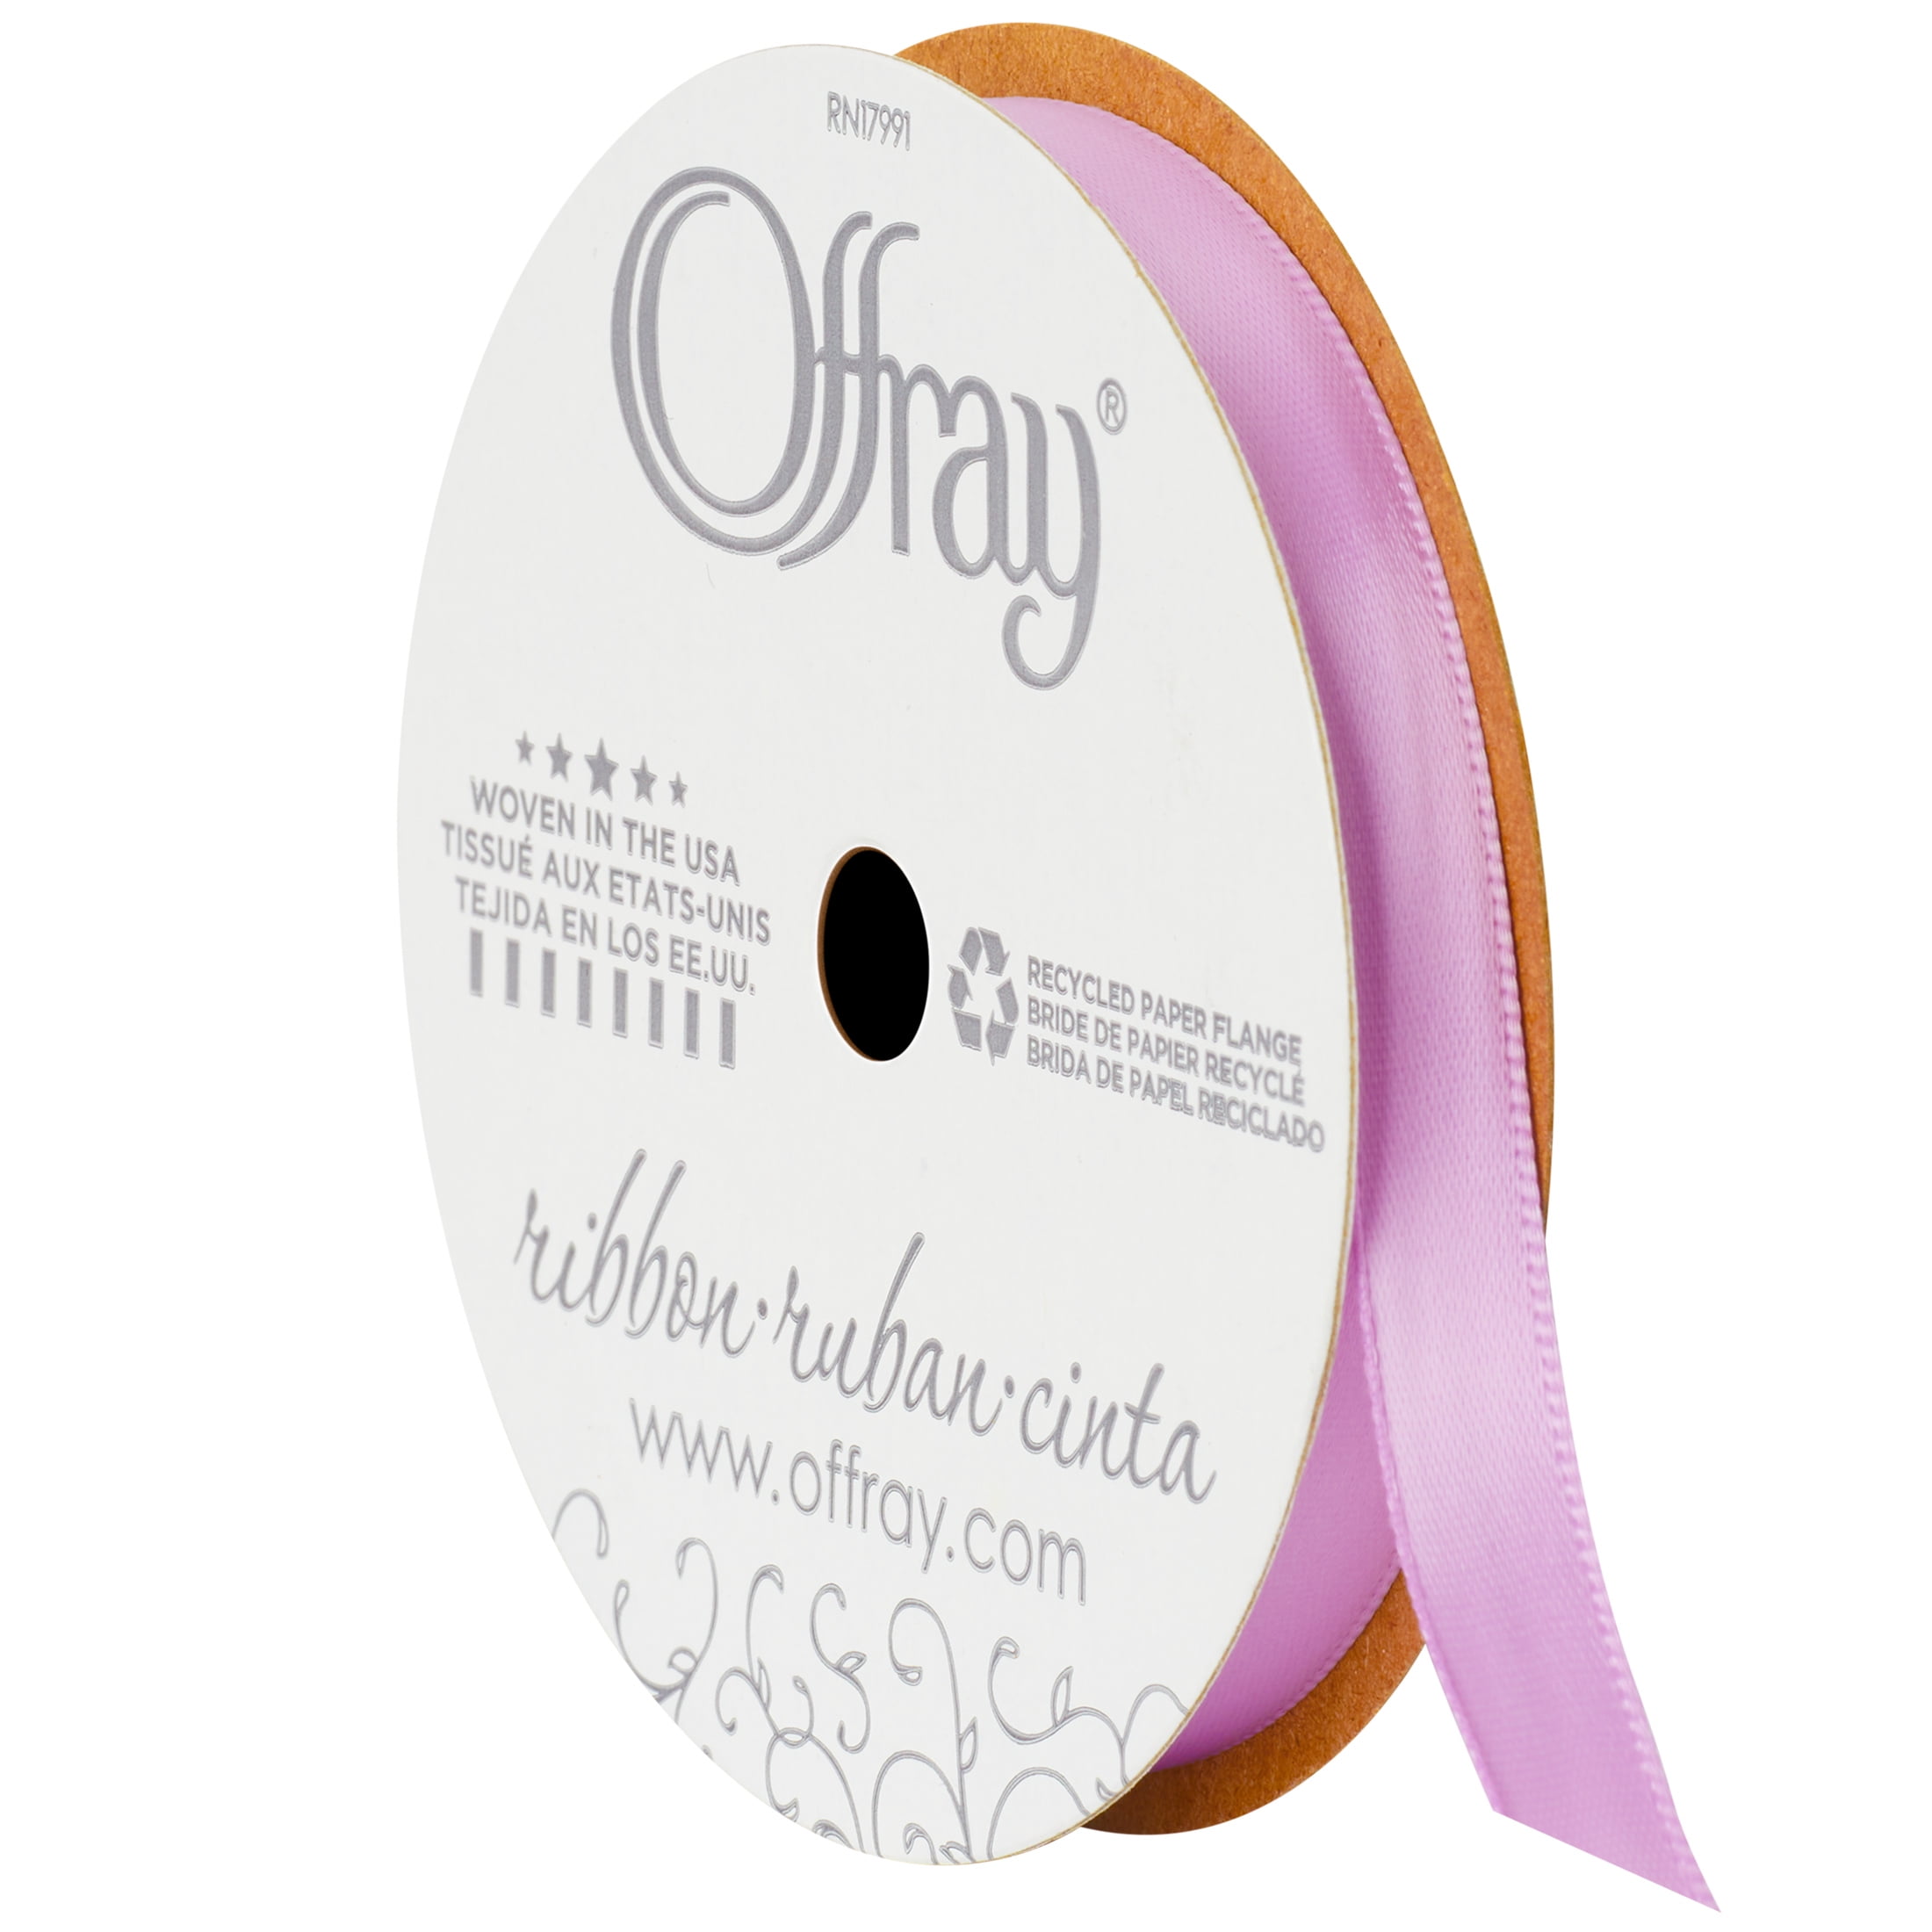 Ribbon Bow with Twist Tie - Lt. Orchid Grosgrain - (50 Bows Pack)